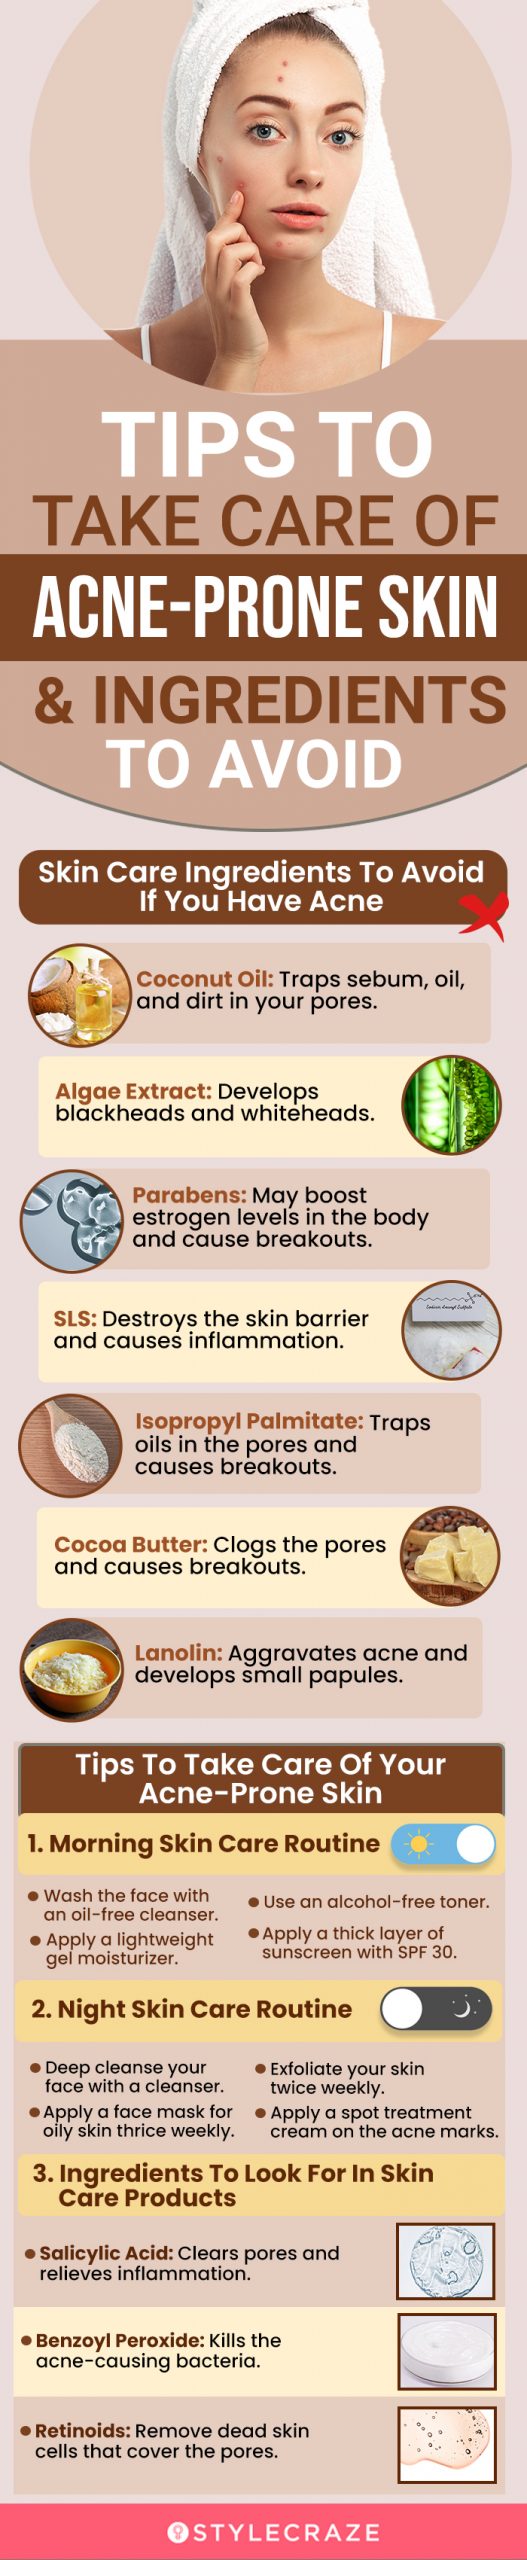 Tips To Take Care Of Acne-Prone Skin [infographic]